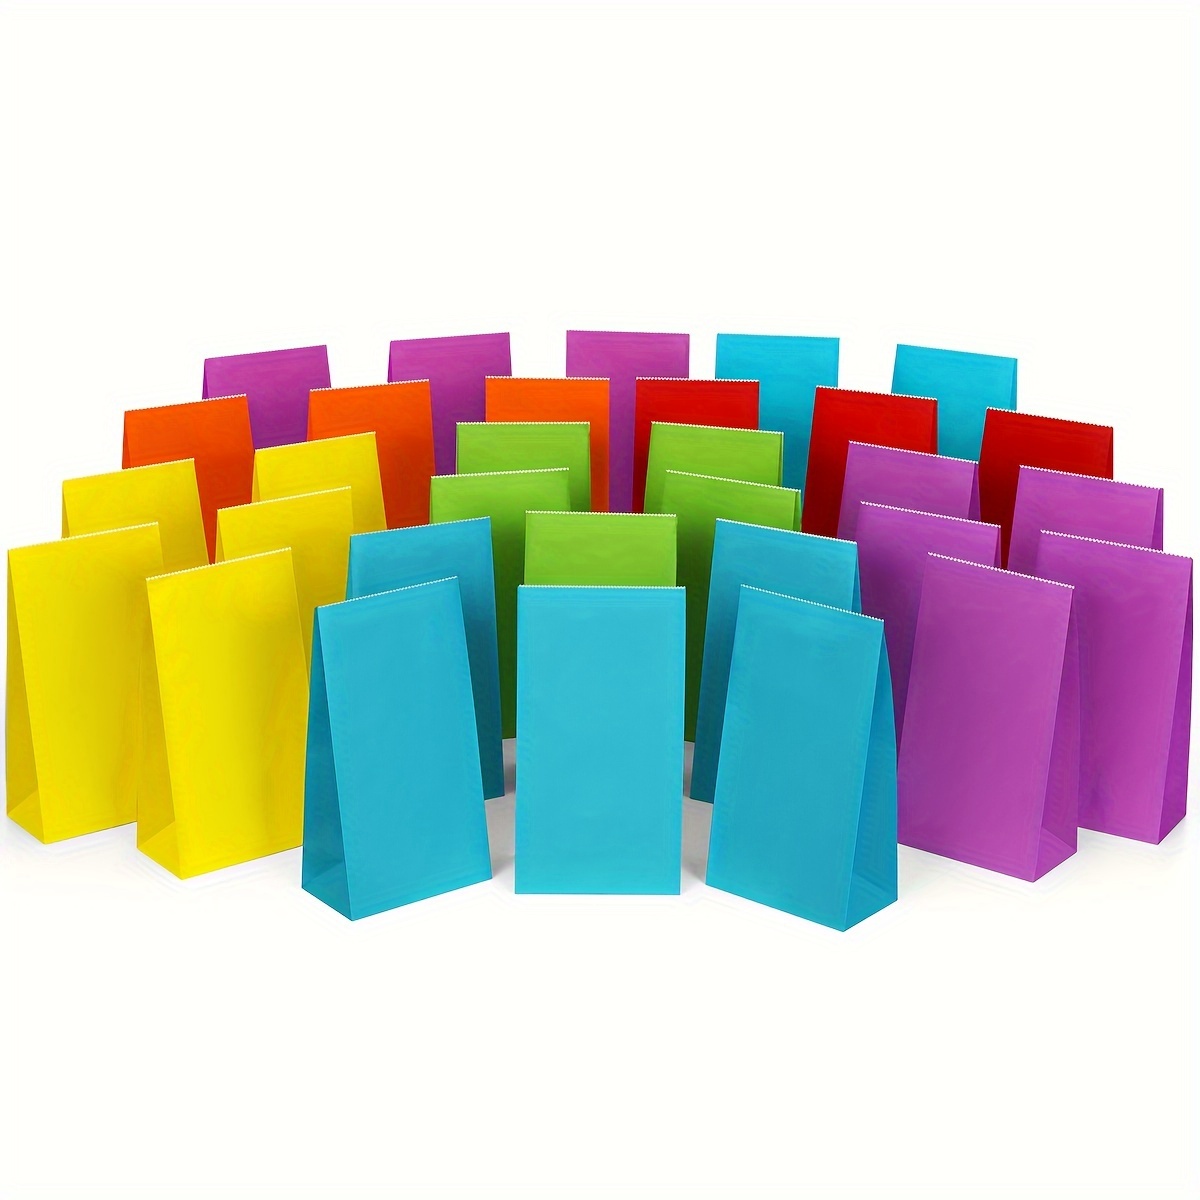 

30/60pcs Paper Party Favor Gift Bags 5x2.95x9.45 Inches/12.7x7.5x24cm Assorted Rainbow Colors Bags For Party, Wedding, Baby Shower, Birthday, Small Gift Bags Snack Bags